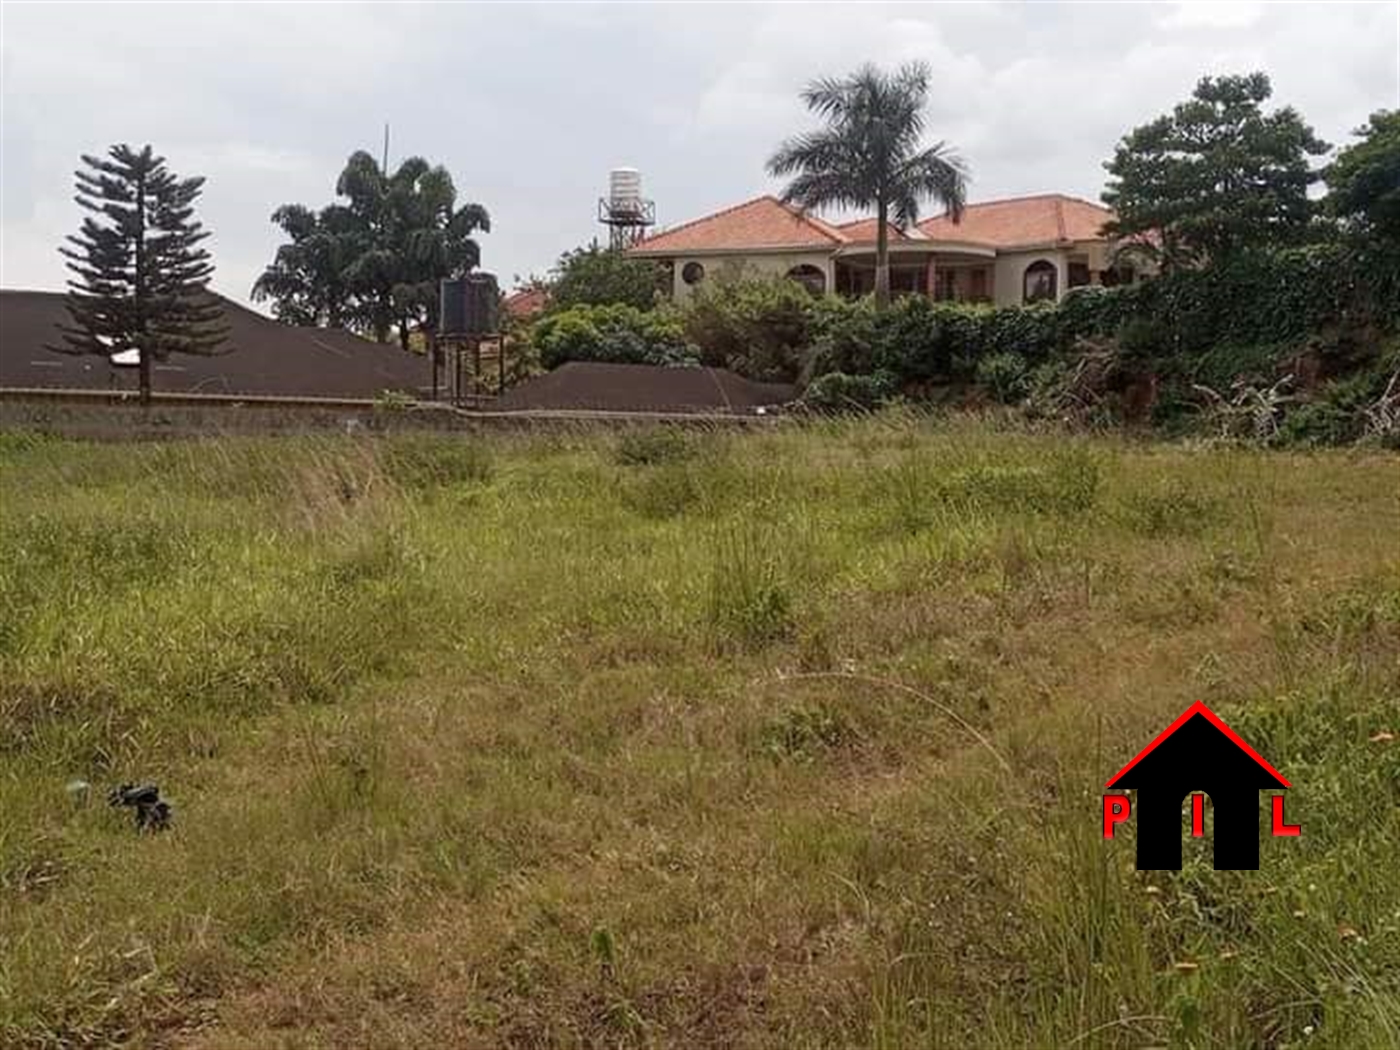 Commercial Land for sale in Butabika Kampala